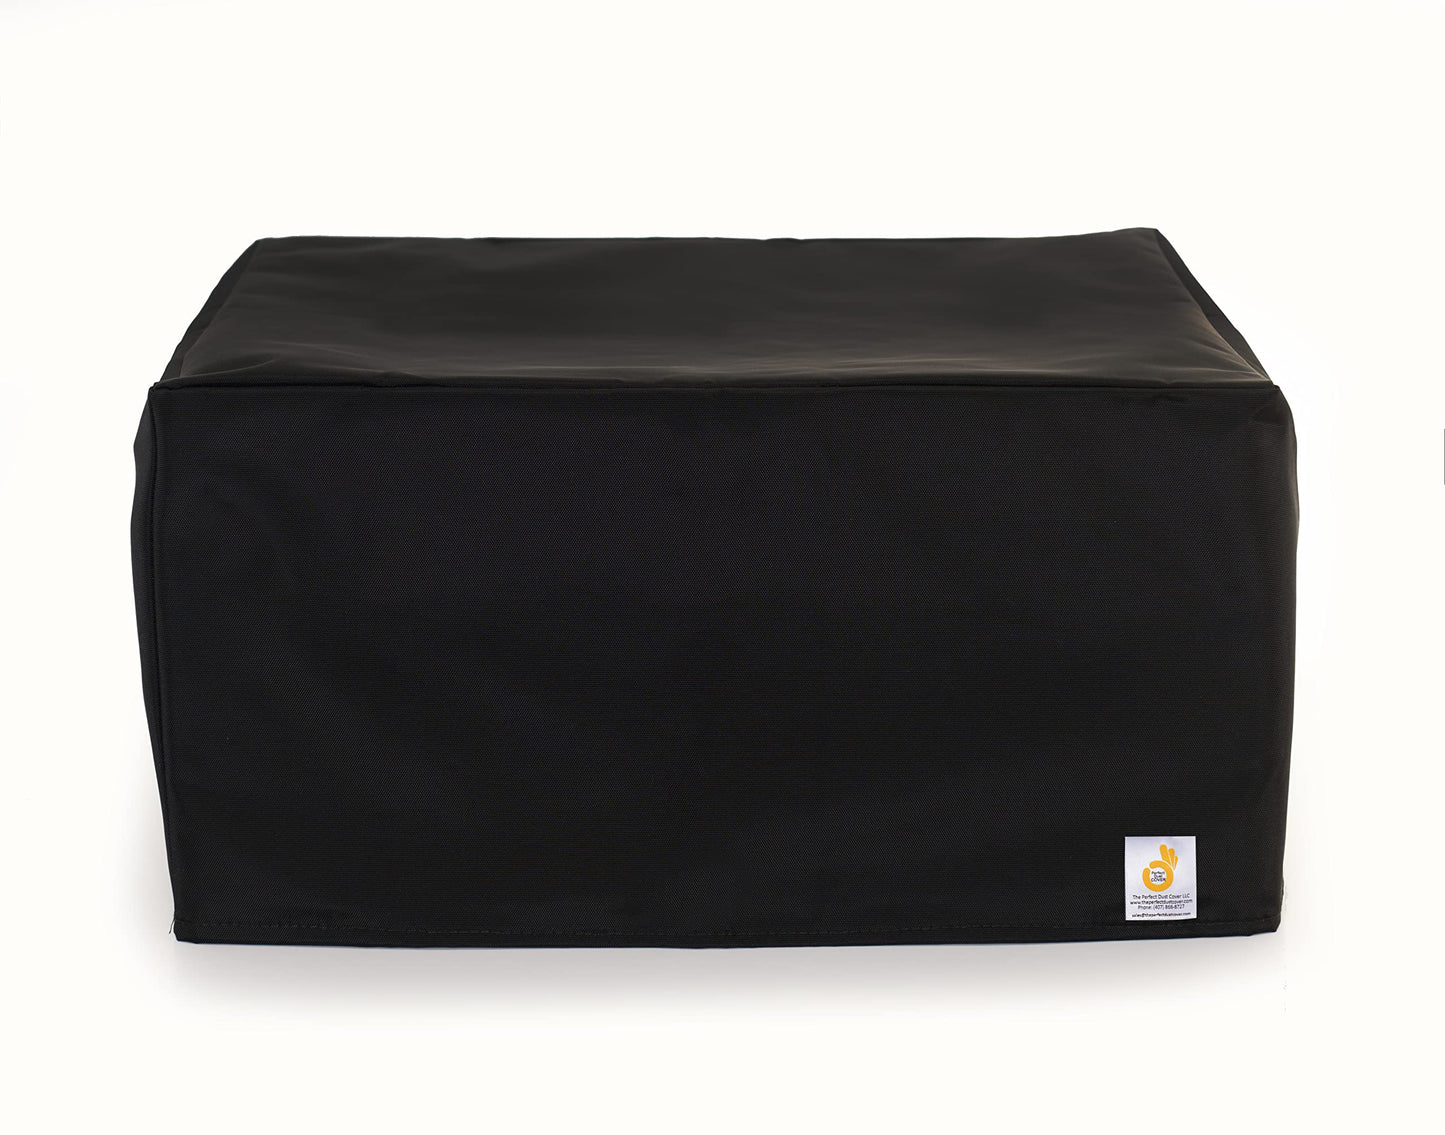 The Perfect Dust Cover, Black Nylon Cover Compatible with HP OfficeJet Pro 8015e Wireless All-in-One Printer, Double Stitched and Waterproof Dust Cover by The Perfect Dust Cover LLC